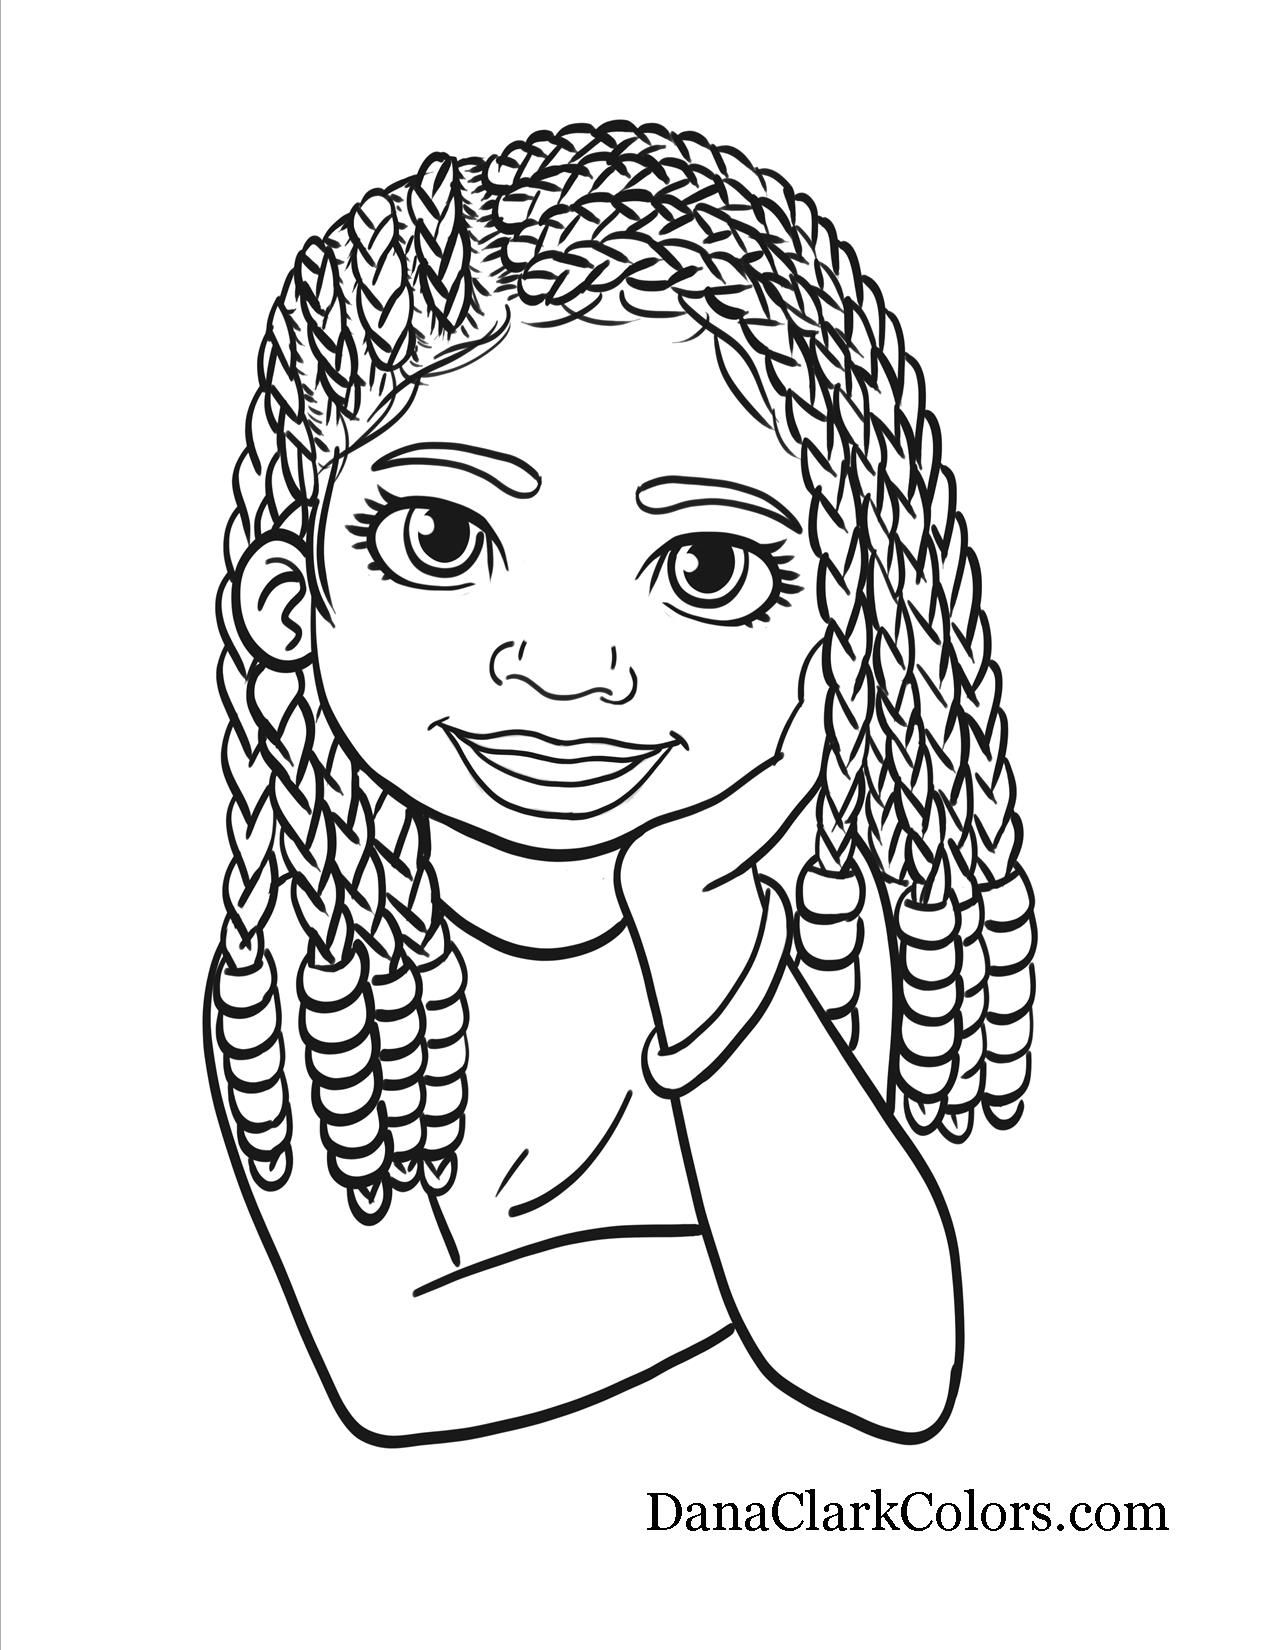 Free Coloring Pages - DanaClarkColors.com | People coloring pages, Coloring  pages for girls, Coloring books